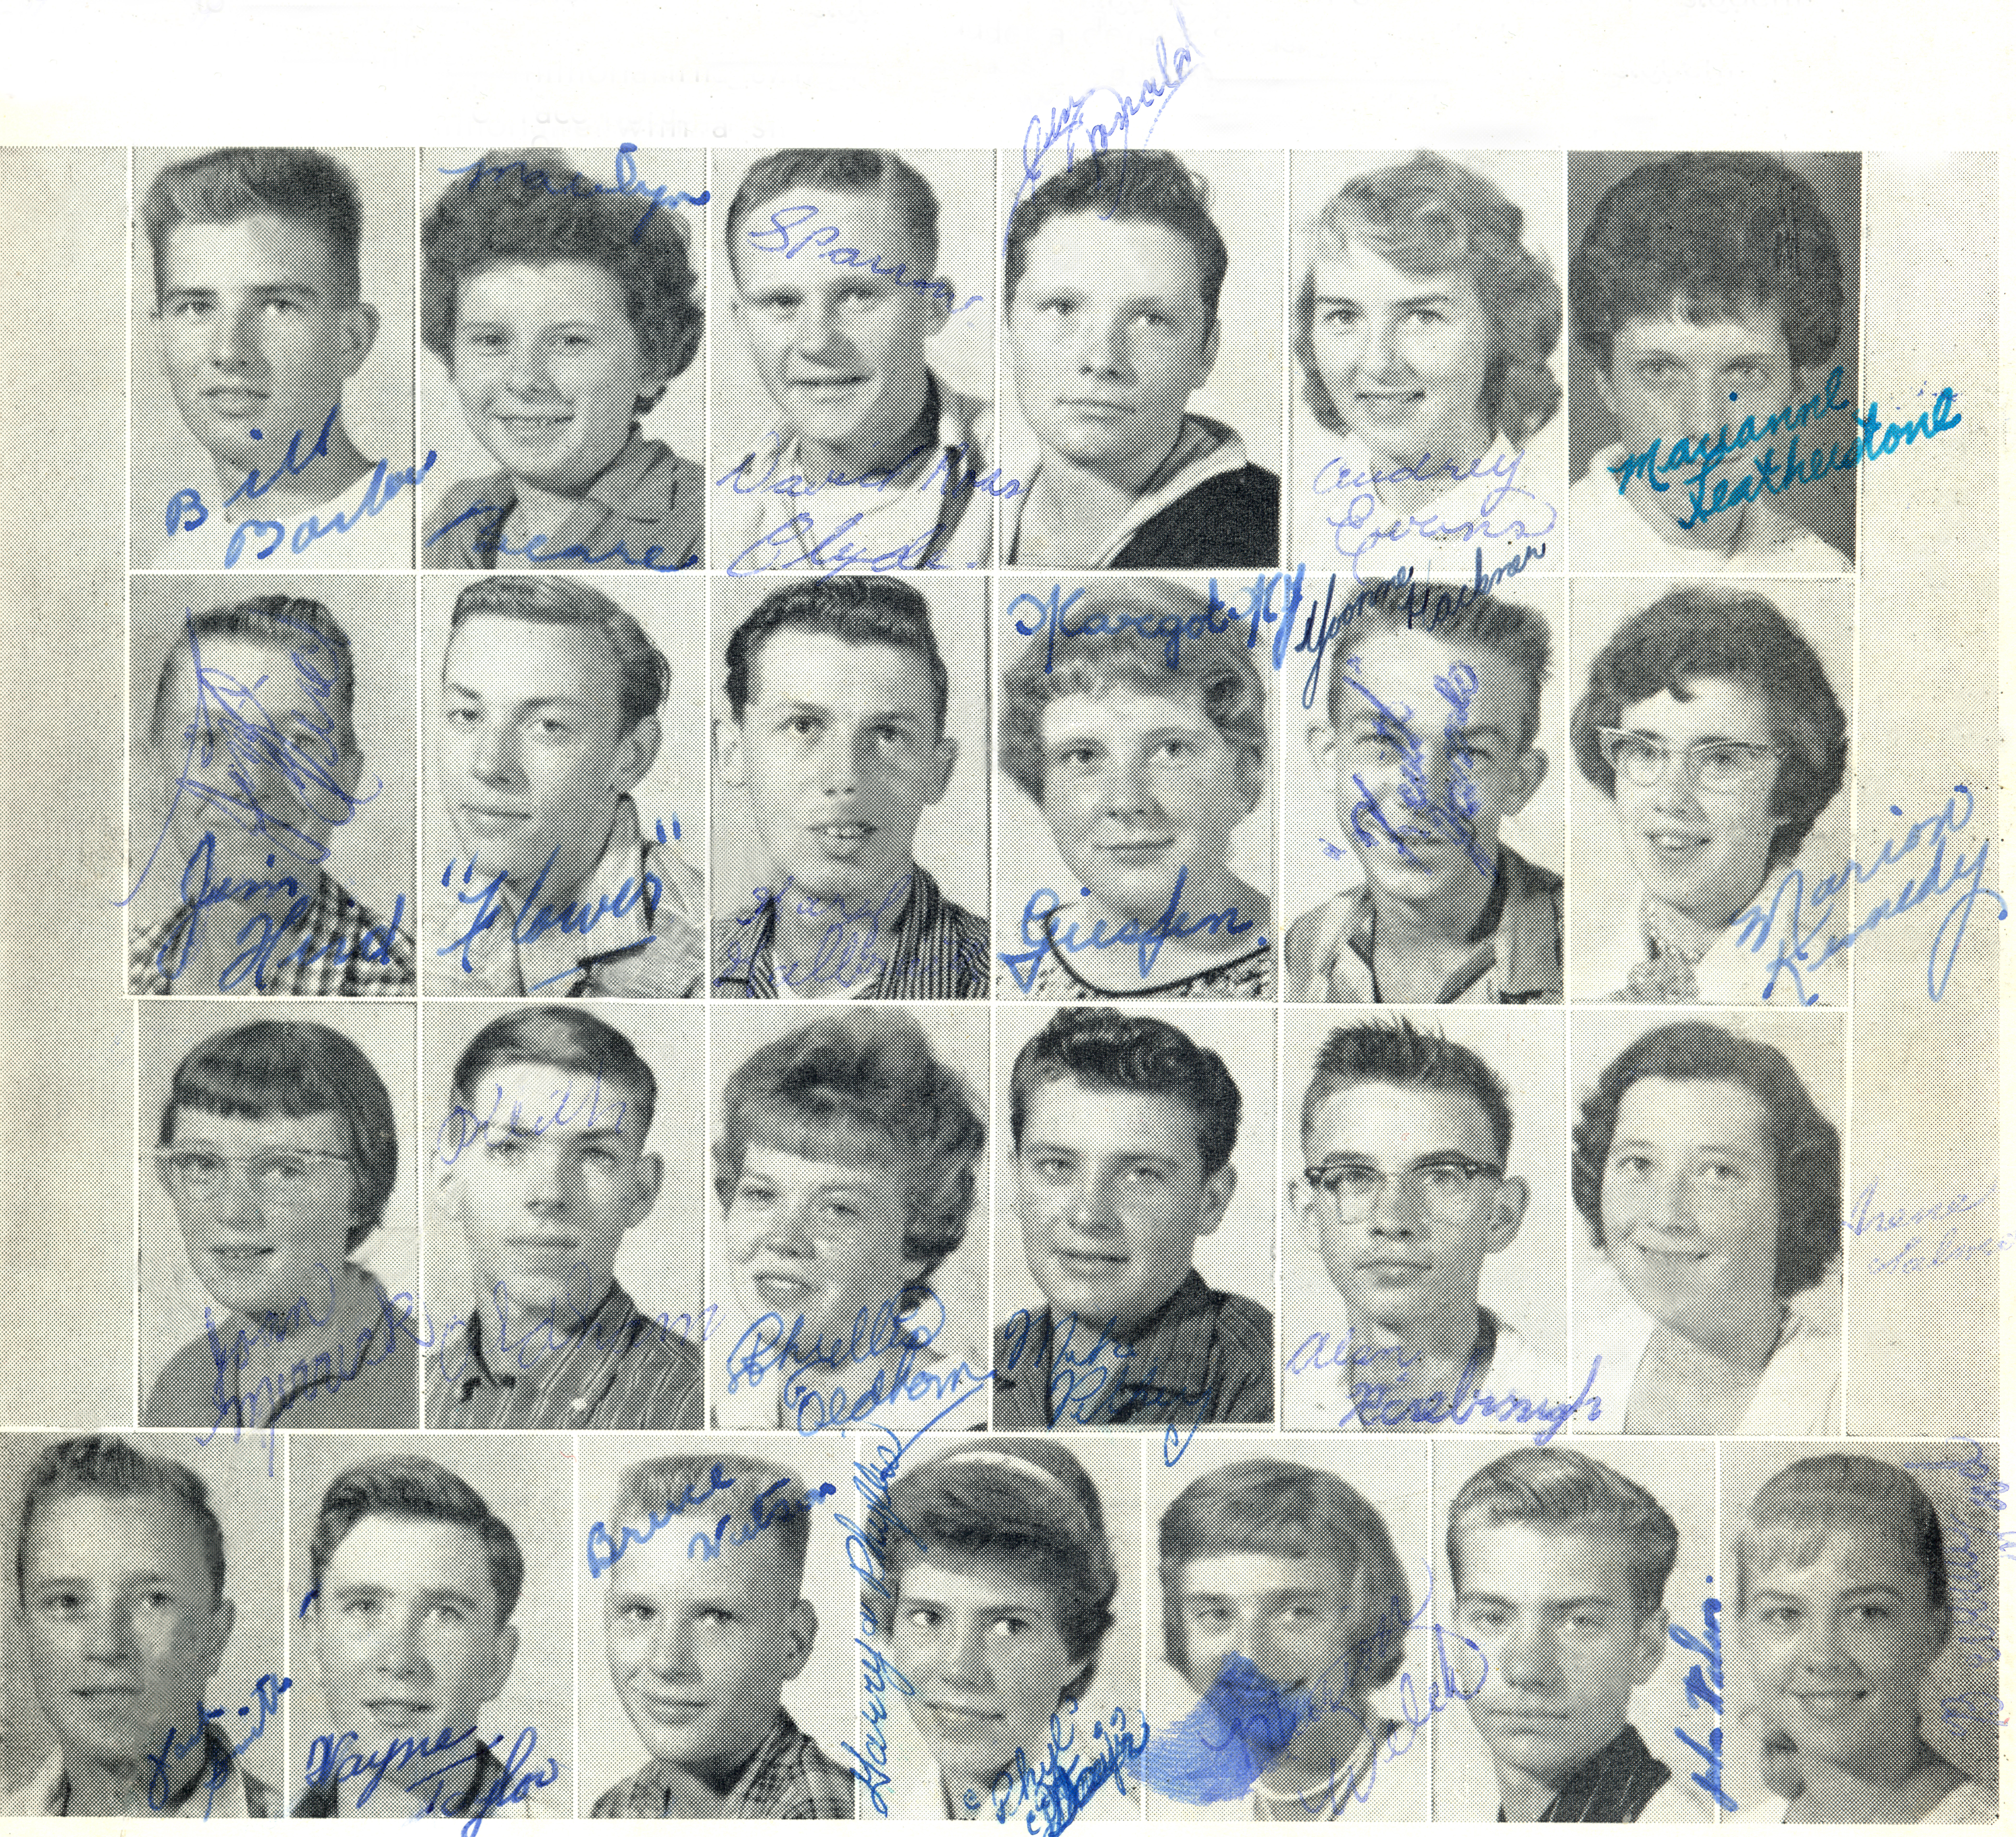 (Click to magnify) TOP ROW: Bill Barlow, Marilyn Beare, David Clyde, James Donald, Audrey Evans, MaryAnne Featherstone; ***SECOND ROW*** Ian Fowlie, Gary Gowlie, Garry Galbraith, James Hird, Margot Geissen, Keith James, Marion Kennedy (7 names for 6 pictu